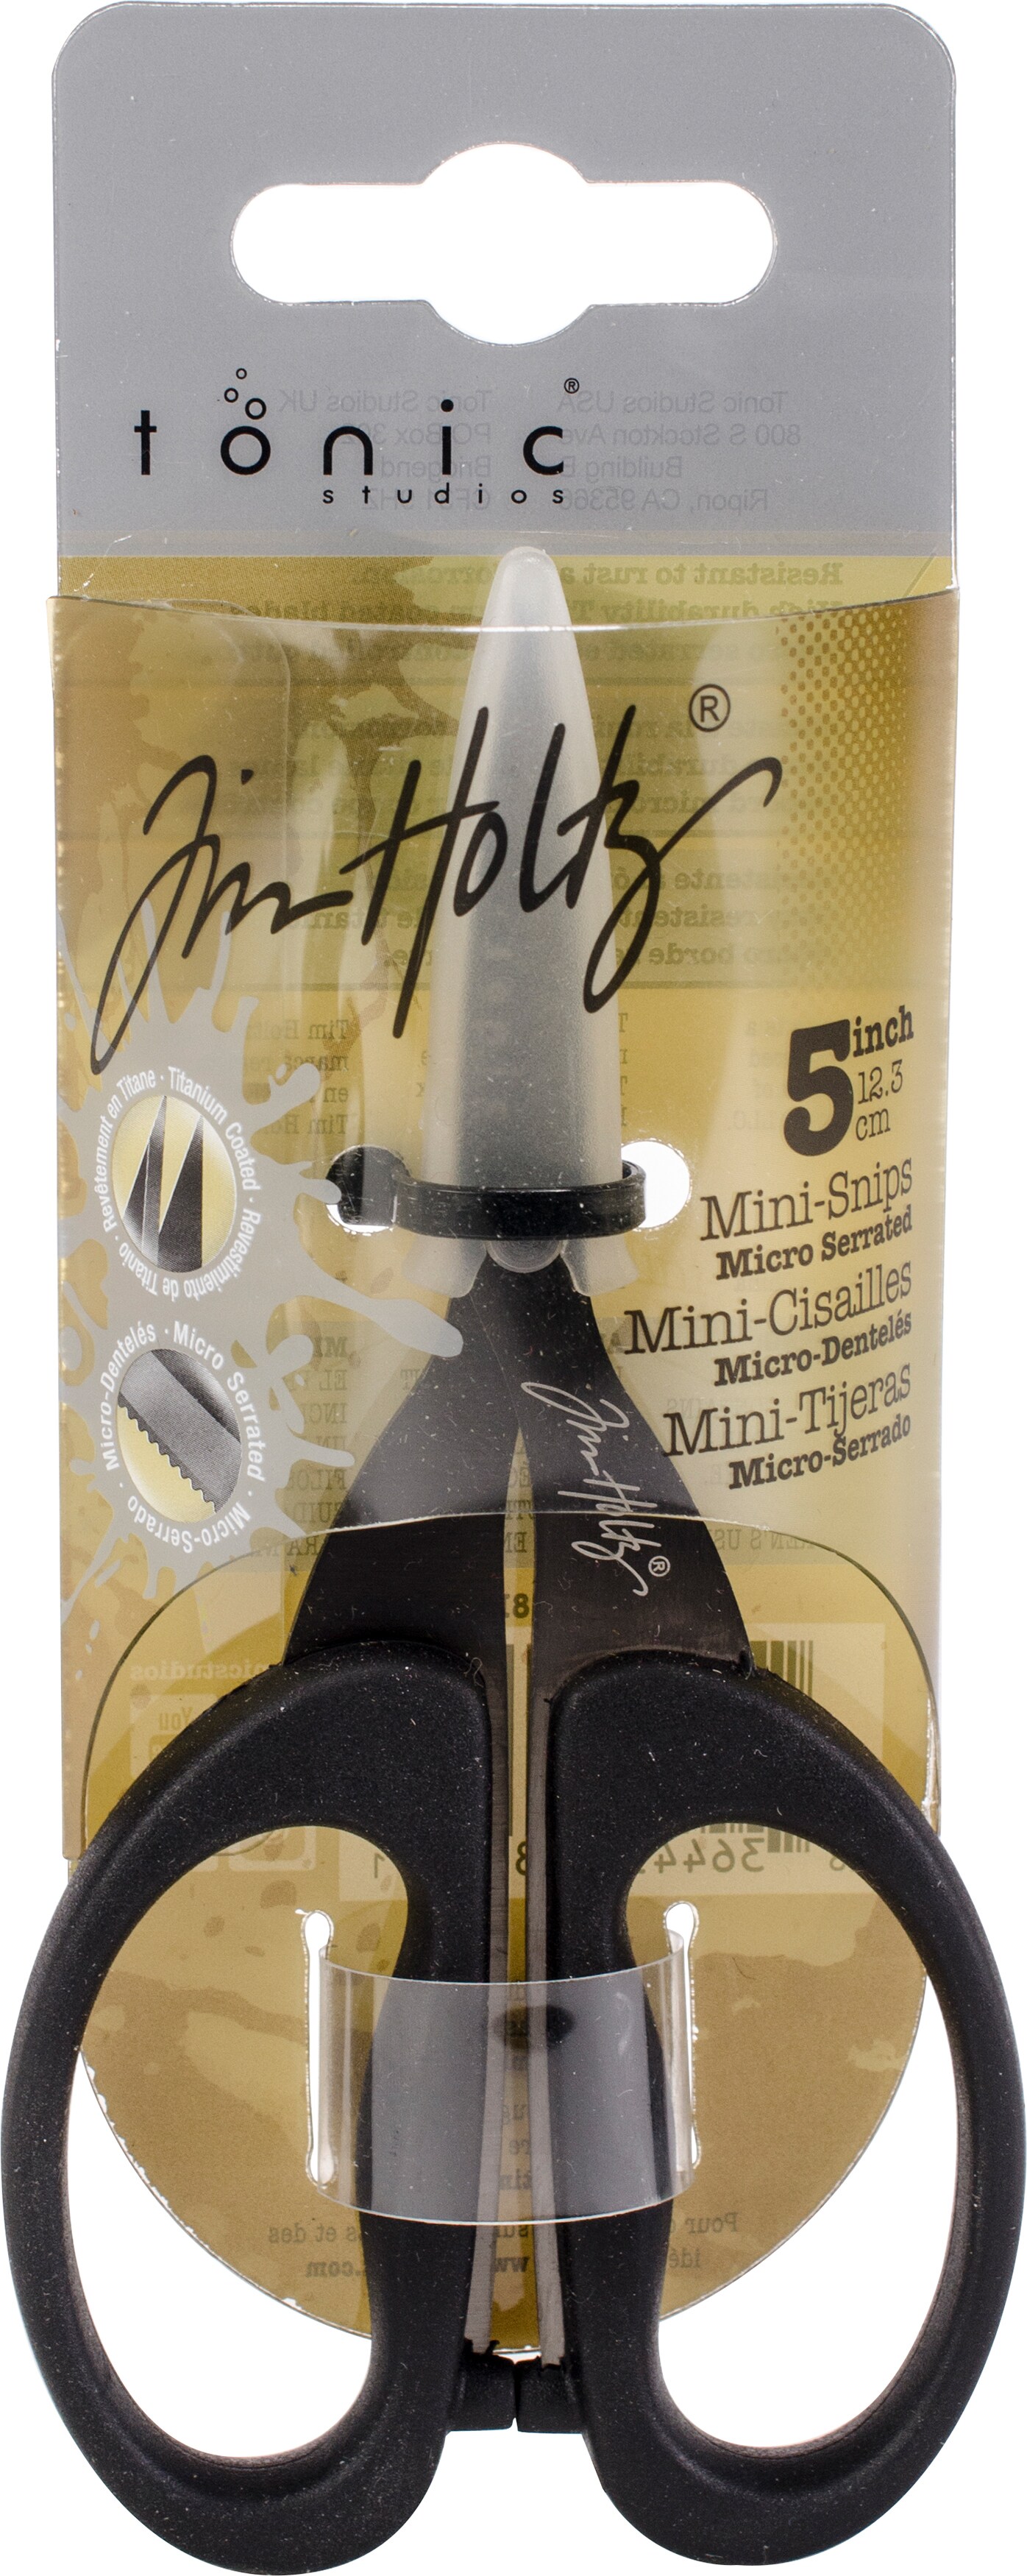 Tim Holtz Small Scissors - 5 Inch Mini Snips with Micro Serrated Blade - Craft Tool for Cutting Paper, Fabric, and Sewing - Titanium with Black Comfort Grip Handles